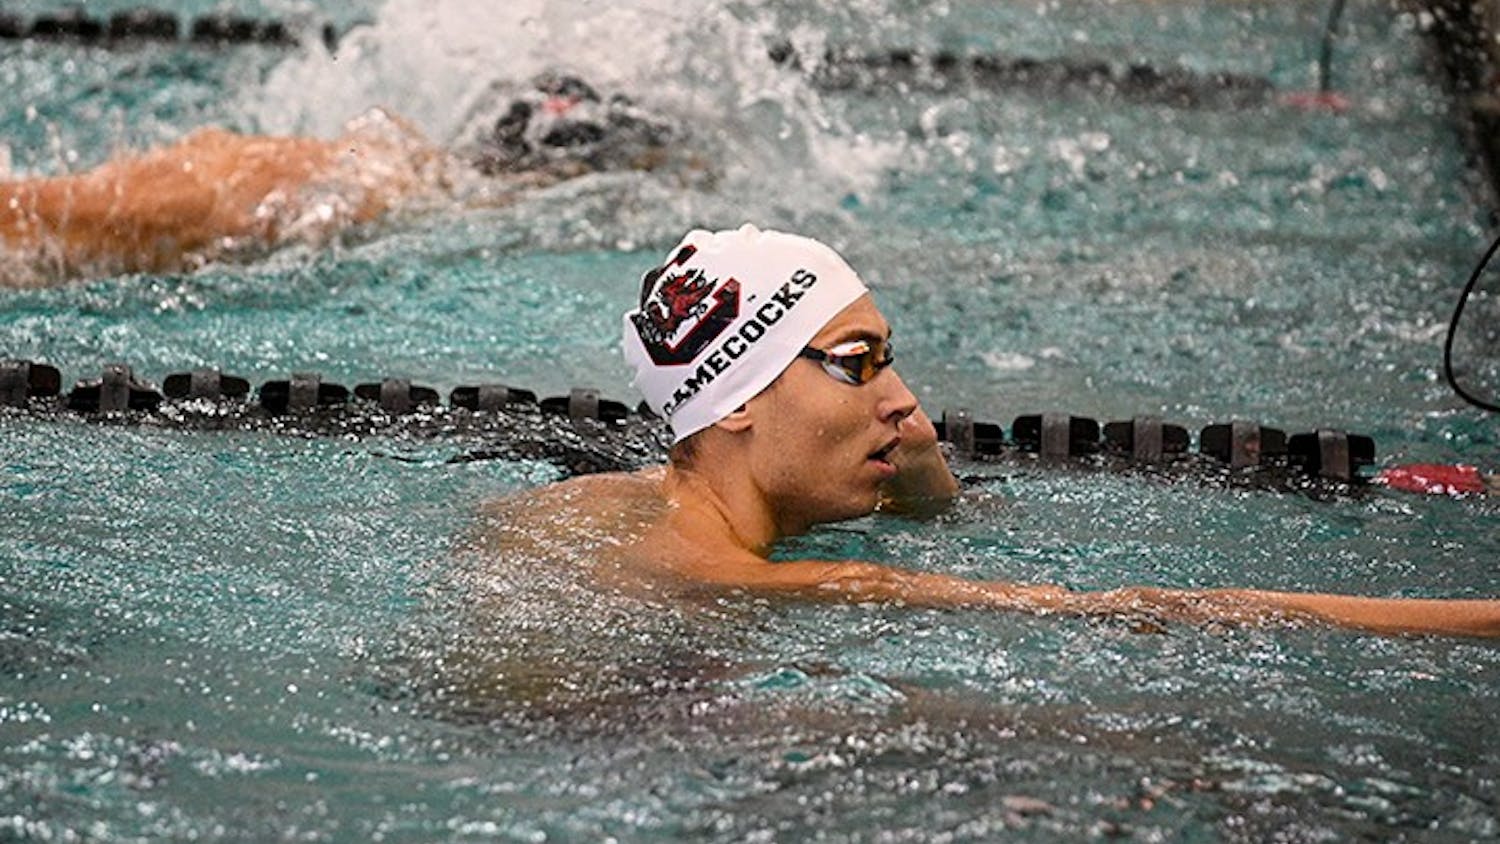 Fifth-year freestyle swimmer Tamas Novoszath in the pool for the Gamecock swimming and diving team.